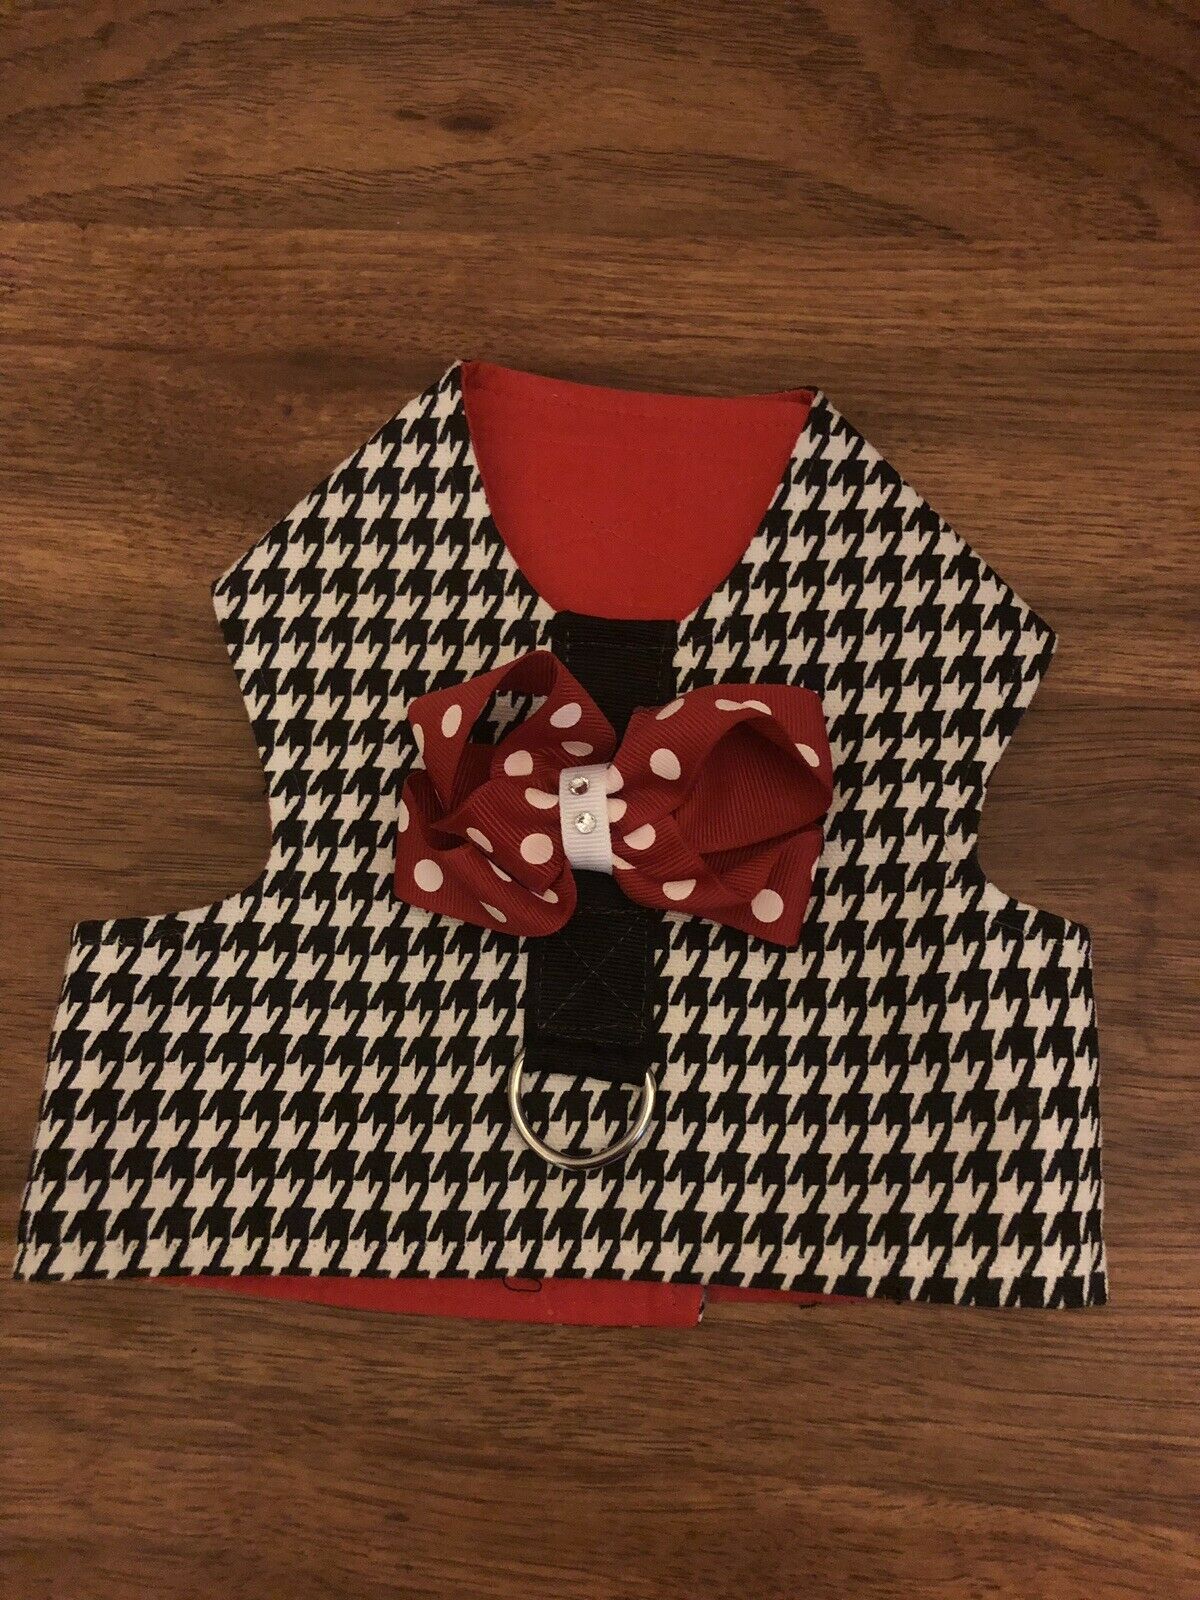 Ritebag Dog Jacket Size Medium Houndstooth Print Red Bow And Leash Ring